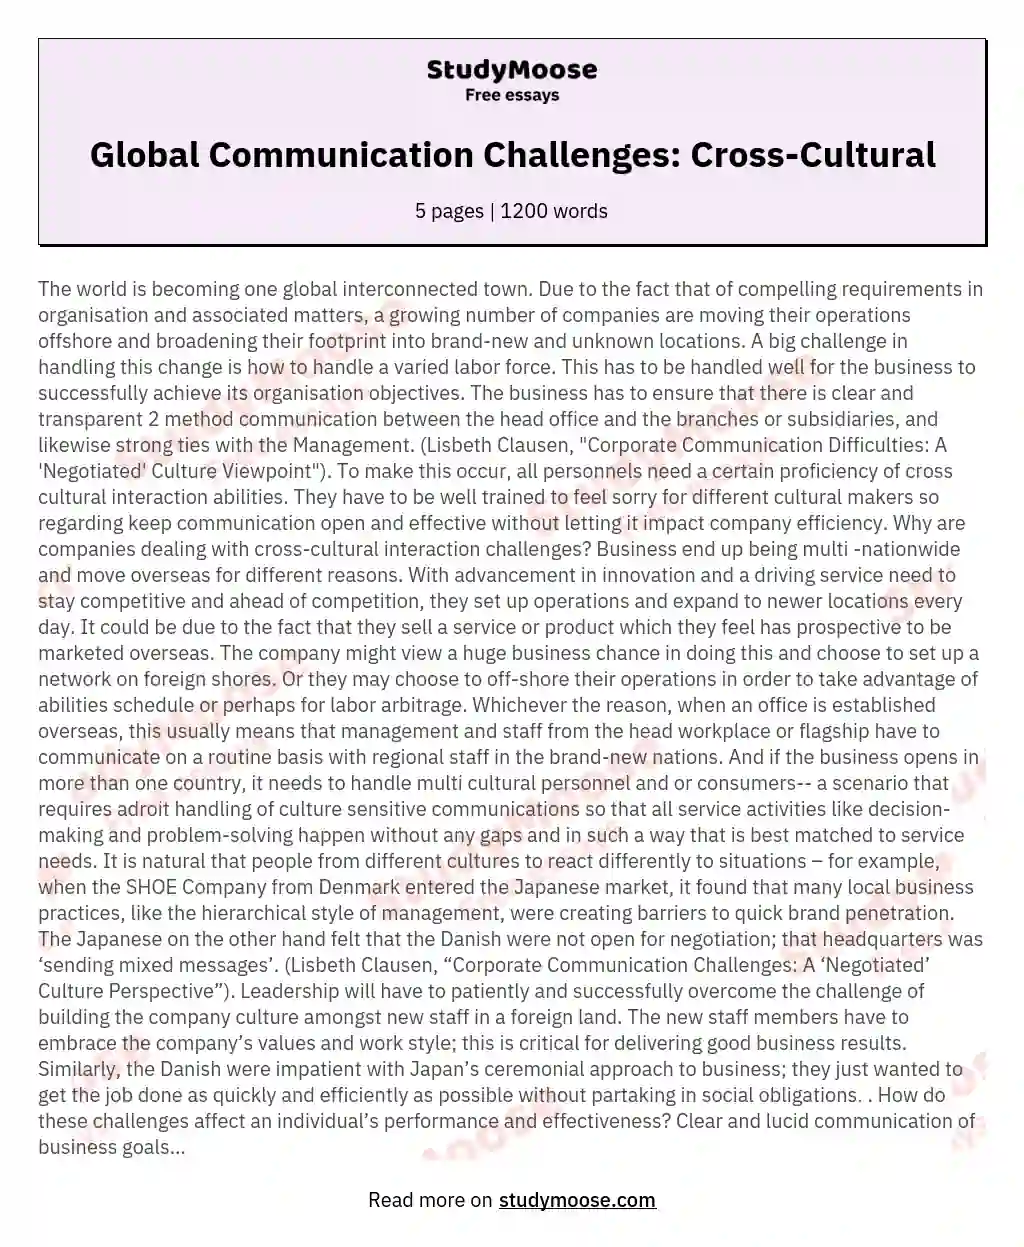 Global Communication Challenges: Cross-Cultural